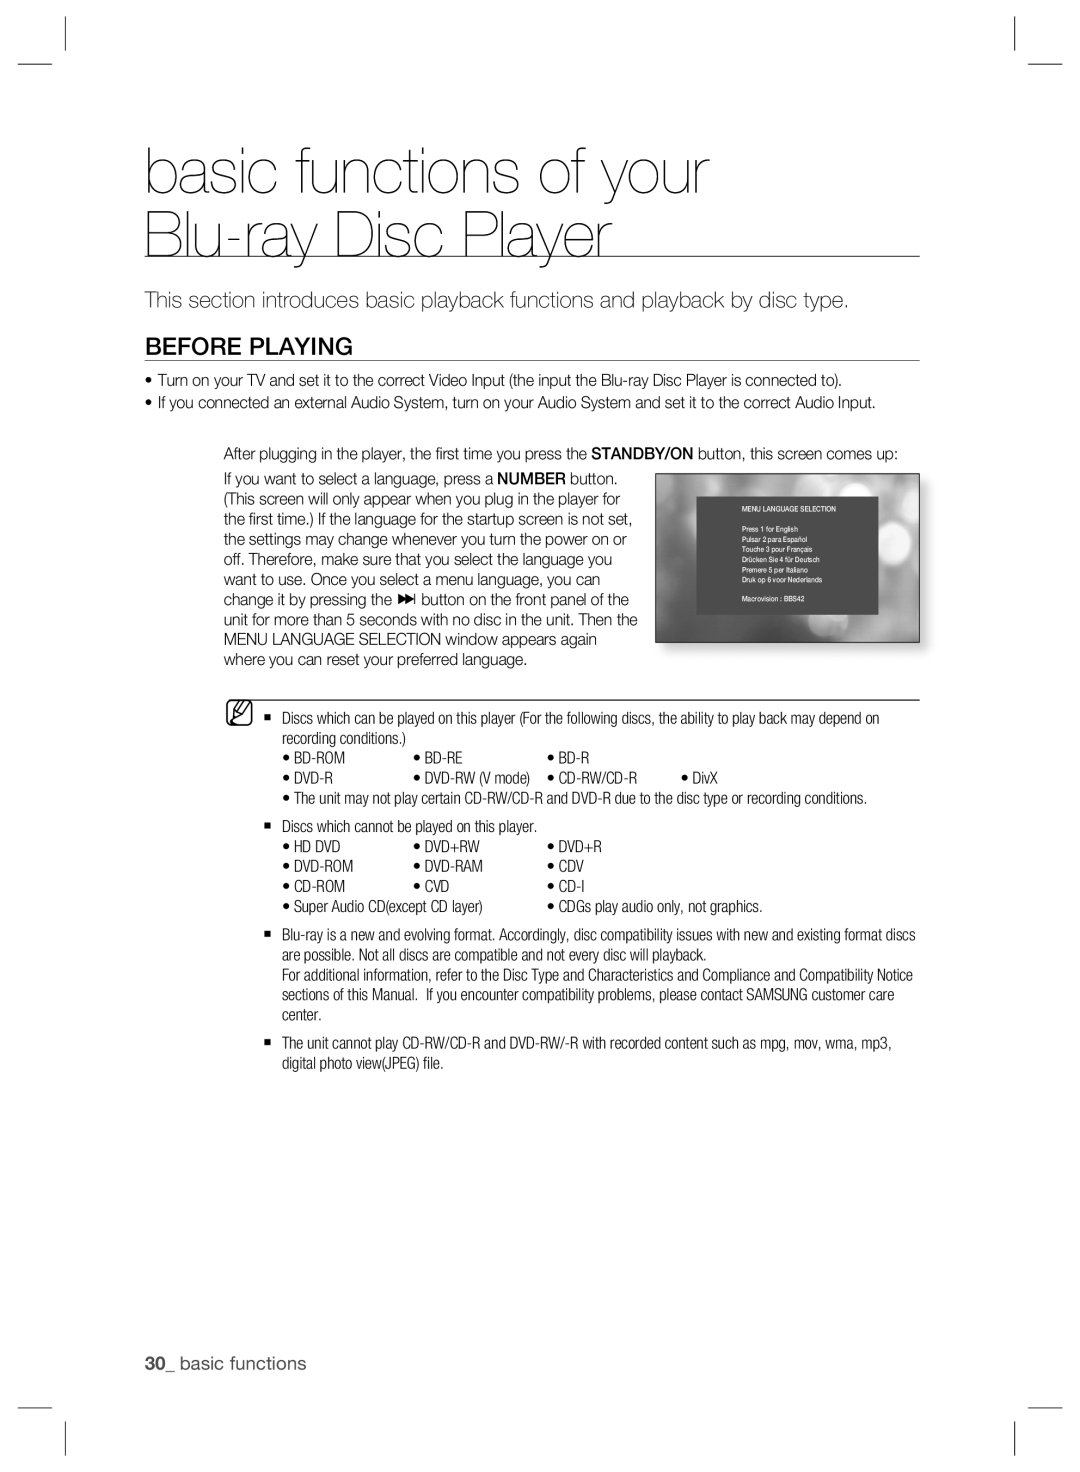 Samsung BD-P2500/EDC, BD-P2500/XEF, BD-P2500/XEE manual Before Playing, basic functions of your Blu-ray Disc Player 